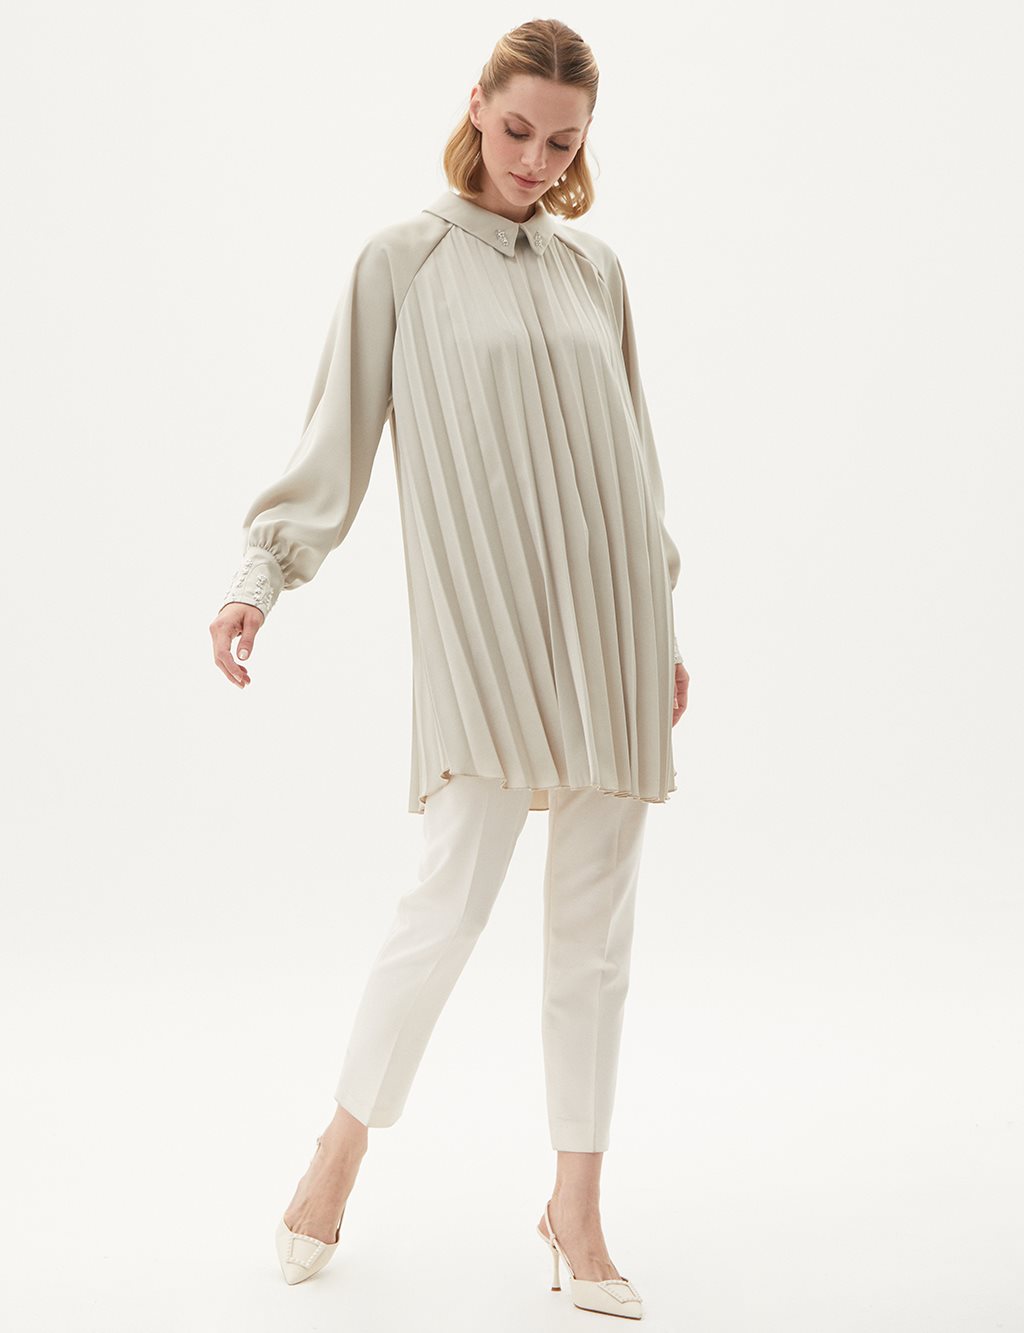 Satin Tunic Cream with Embroidered Sleeves